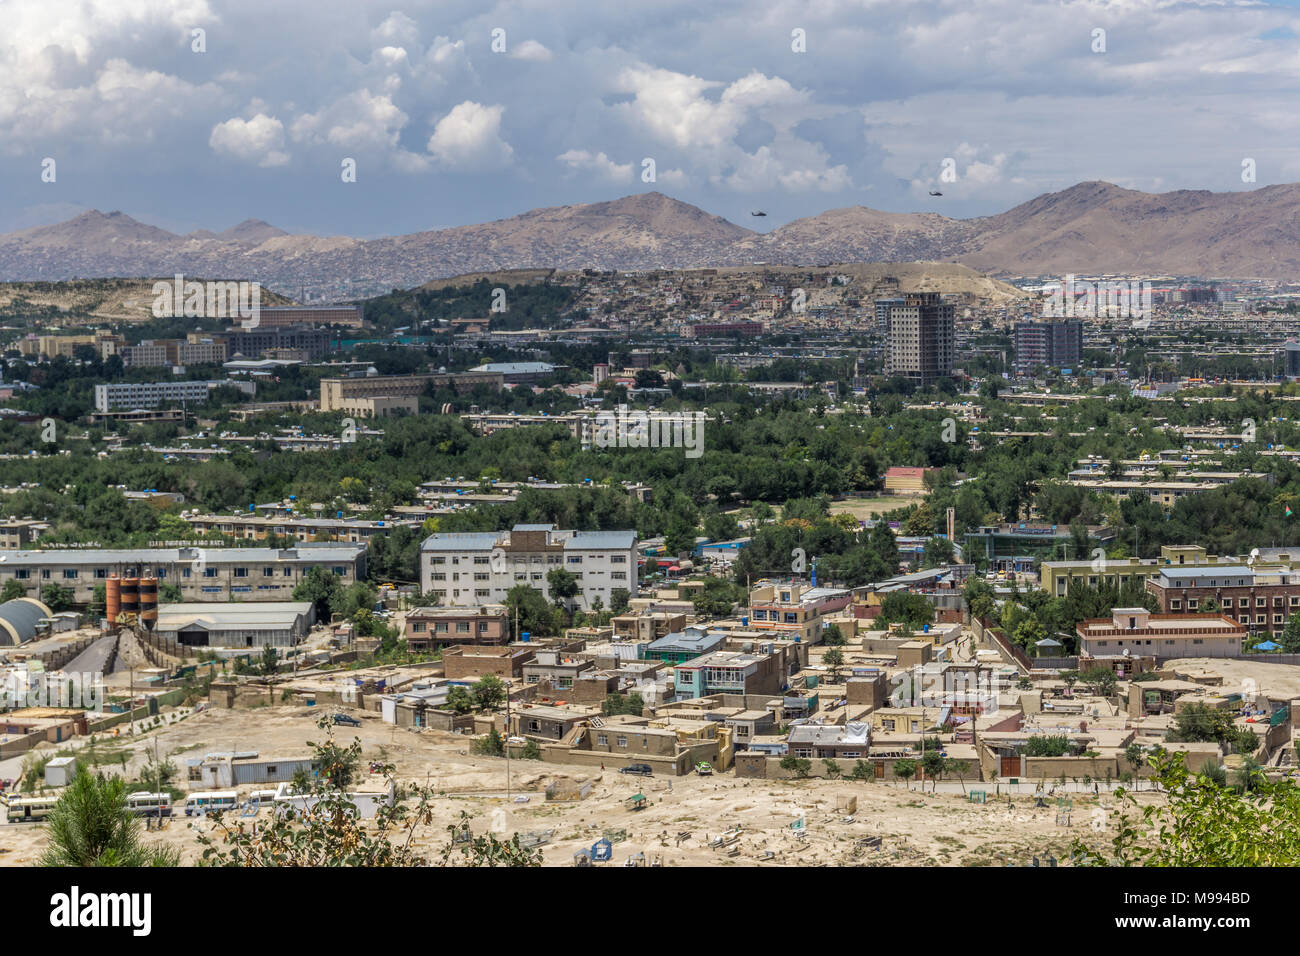 Overview of Kabul, Afghanistan Stock Photo